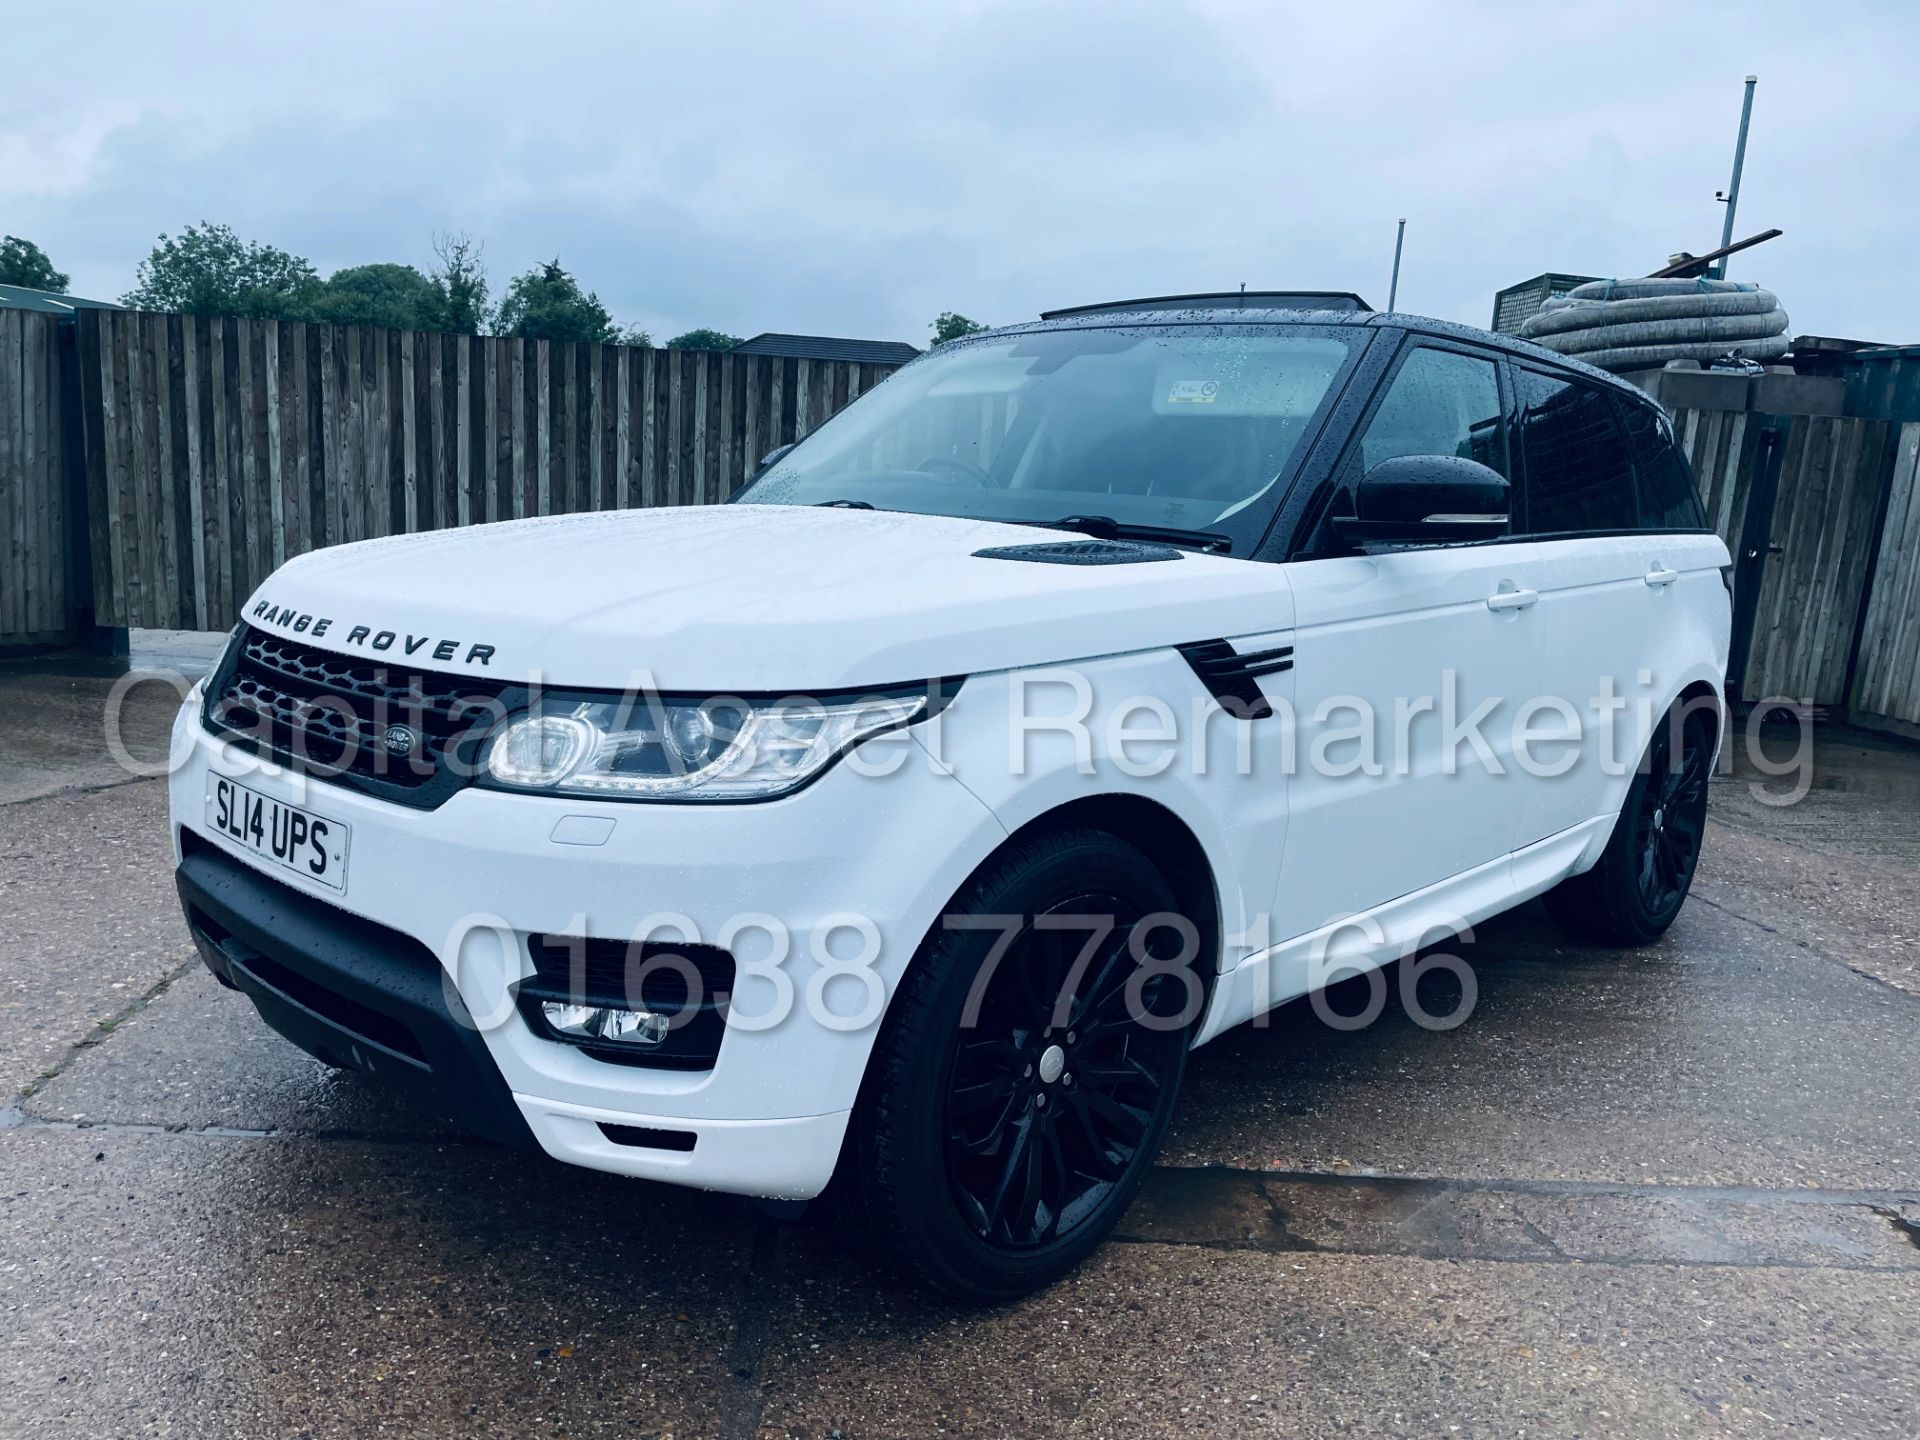 On Sale RANGE ROVER SPORT *SPECIAL EDITION* (2014) '3.0 TDV6 - AUTO' *SAT NAV & PAN ROOF* (TOP SPEC) - Image 2 of 54